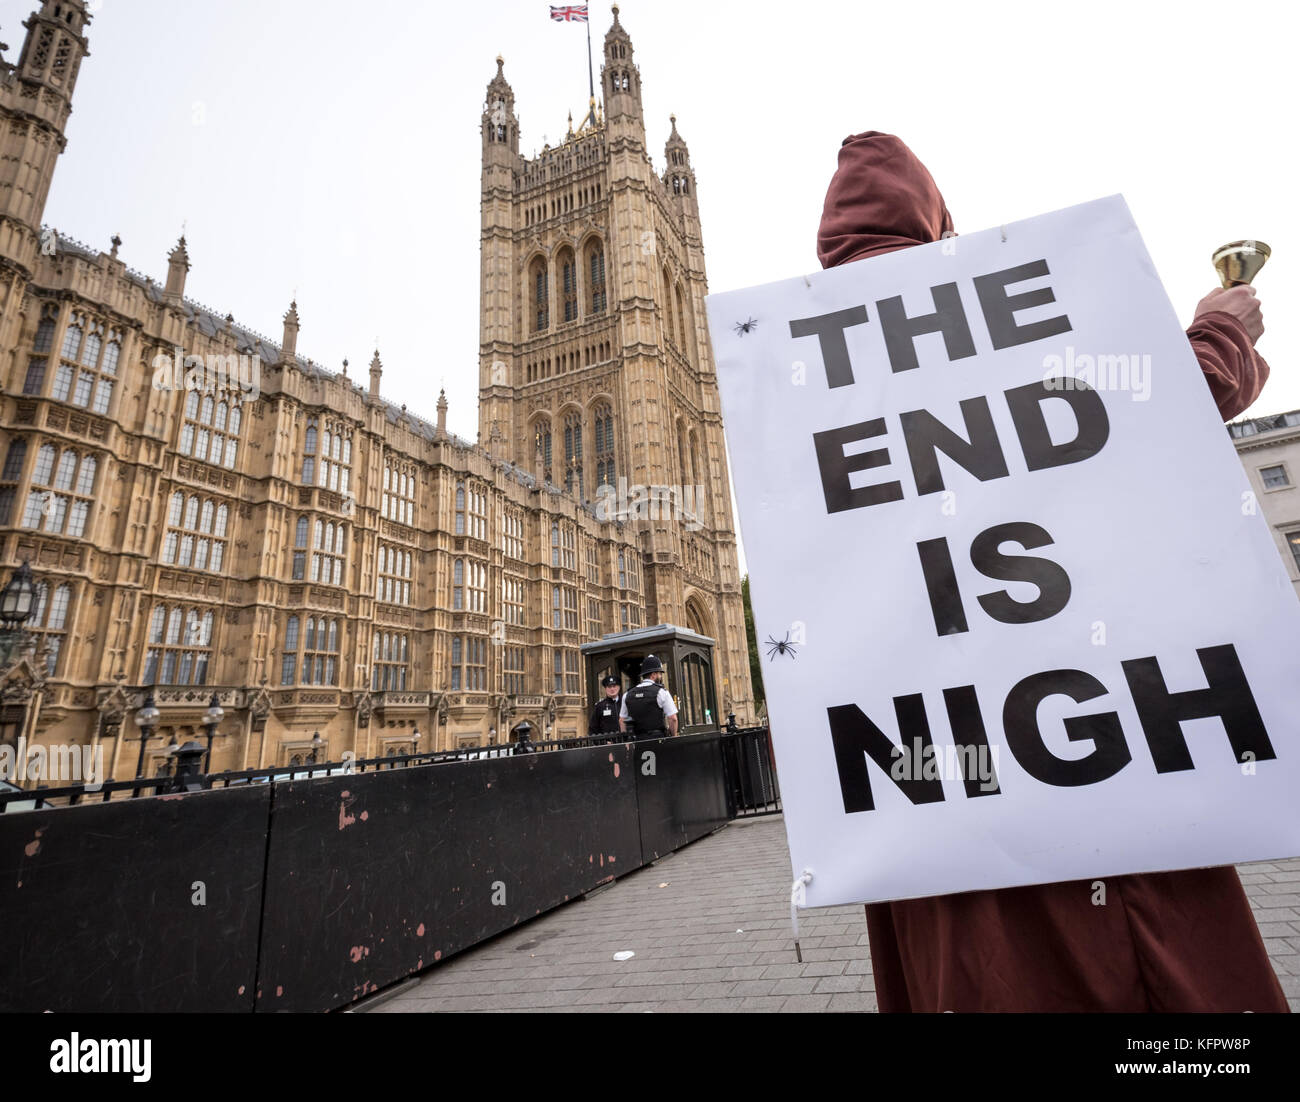 london-uk-31st-oct-2017-the-end-is-nigh-apocalyptic-sign-is-seen-near-KFPW8P.jpg